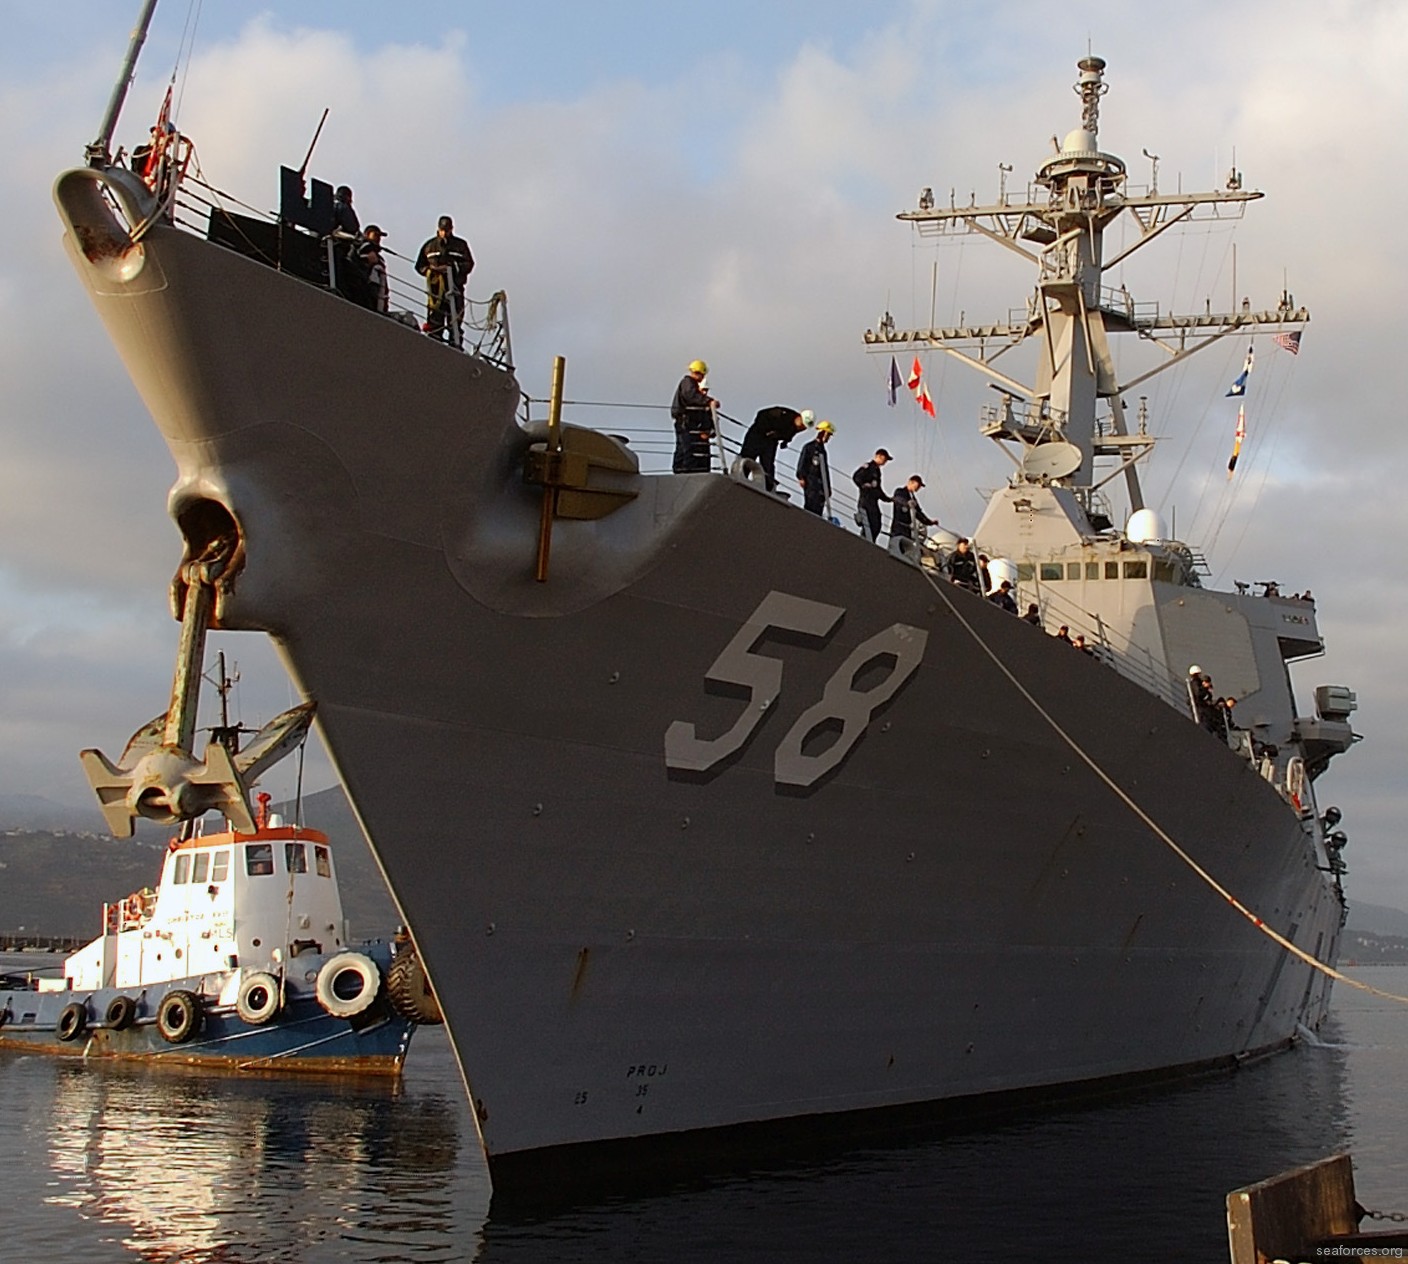 ddg-58 uss laboon guided missile destroyer us navy 66 souda bay nato